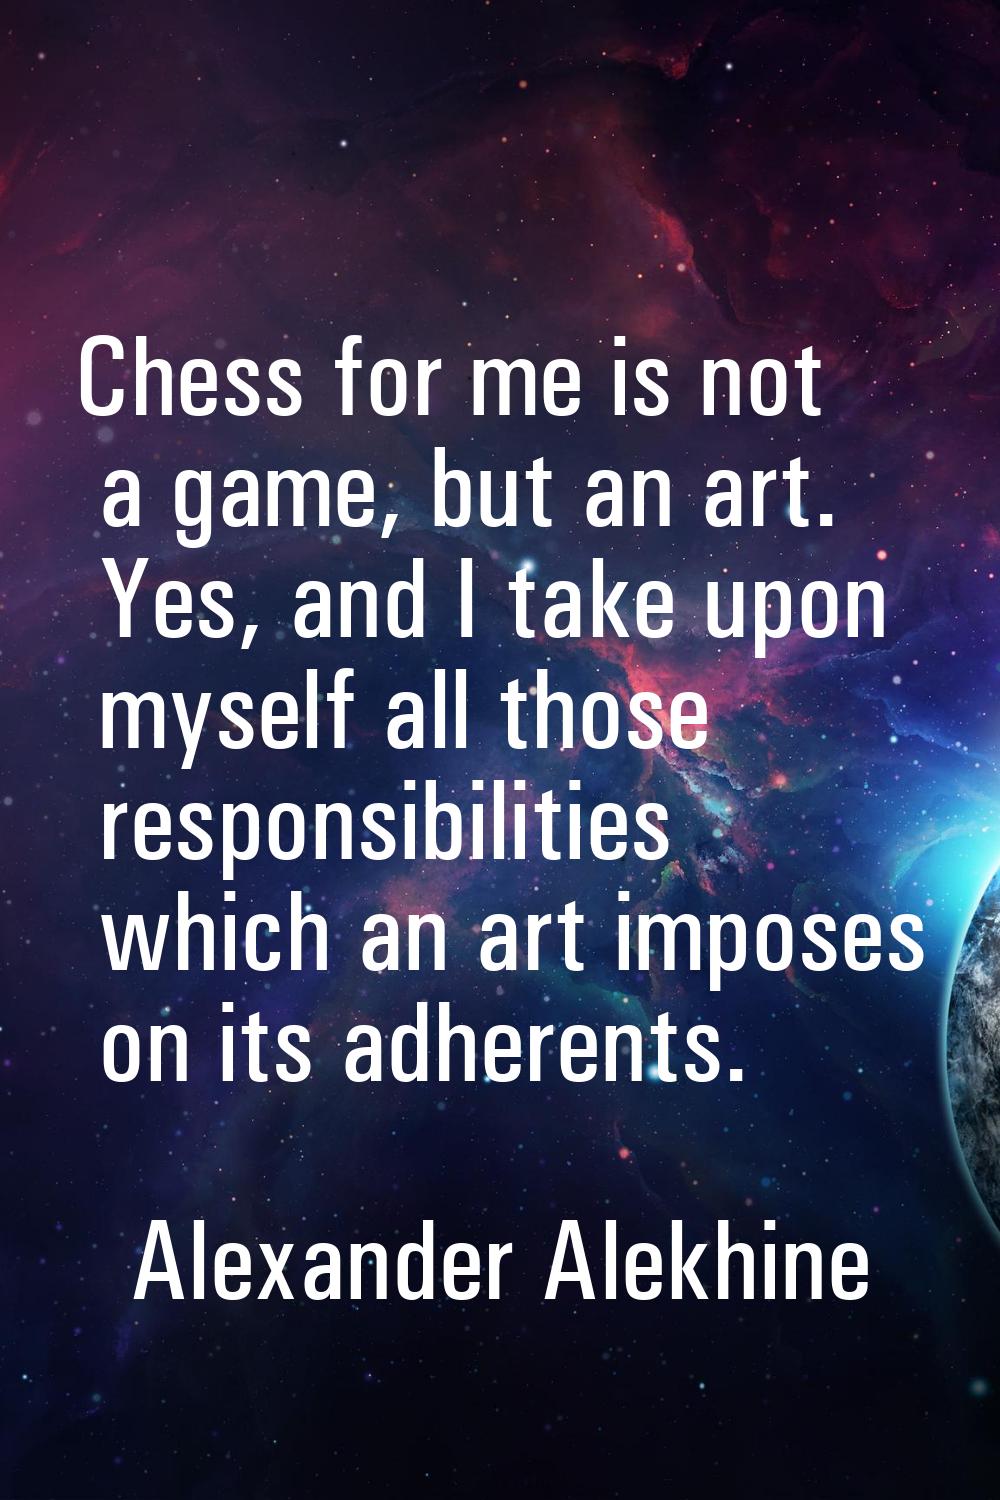 Chess for me is not a game, but an art. Yes, and I take upon myself all those responsibilities whic